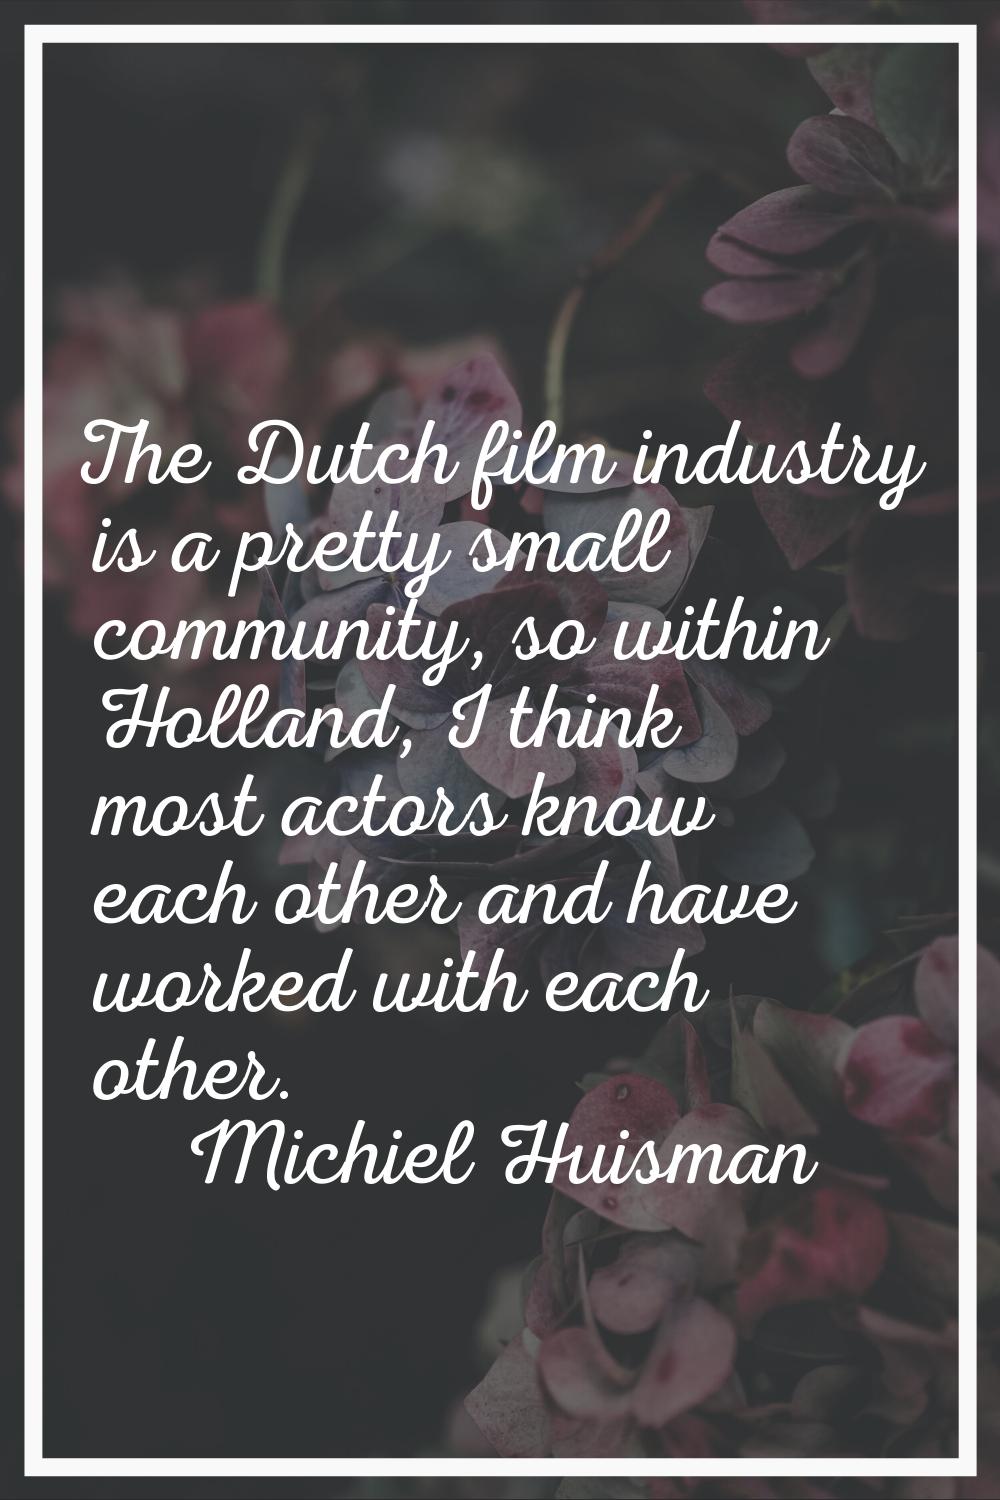 The Dutch film industry is a pretty small community, so within Holland, I think most actors know ea